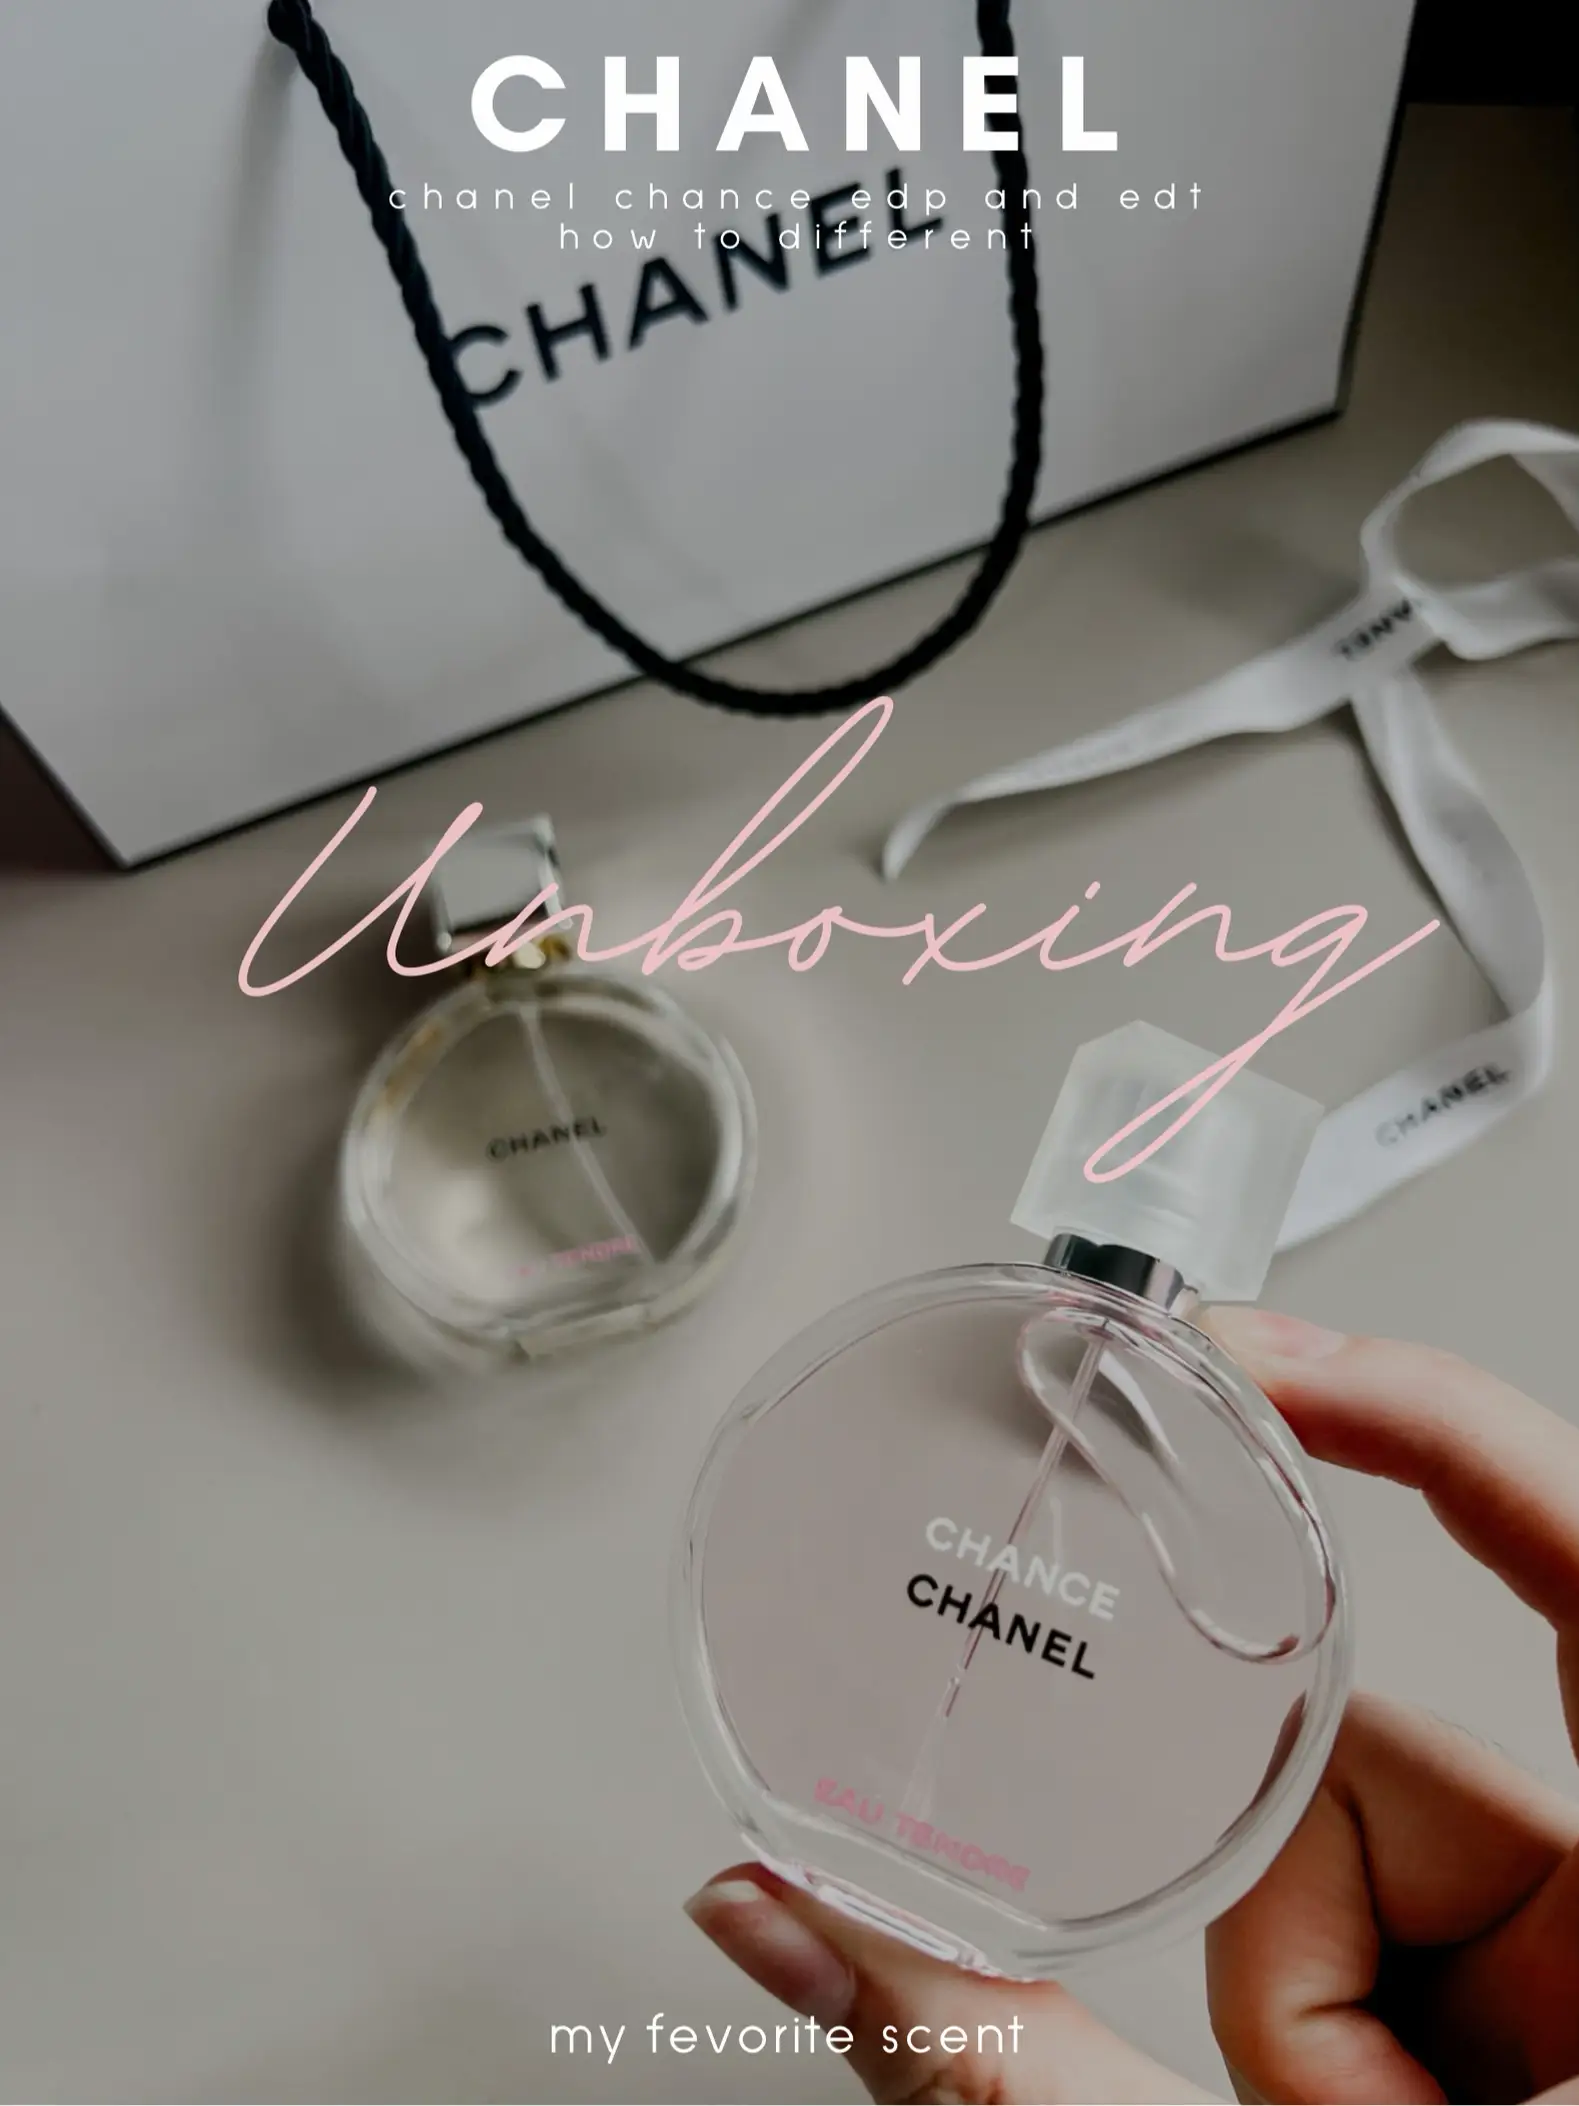 CHANEL LE COTON UNBOXING & PRODUCT REVIEW, Its worth it?